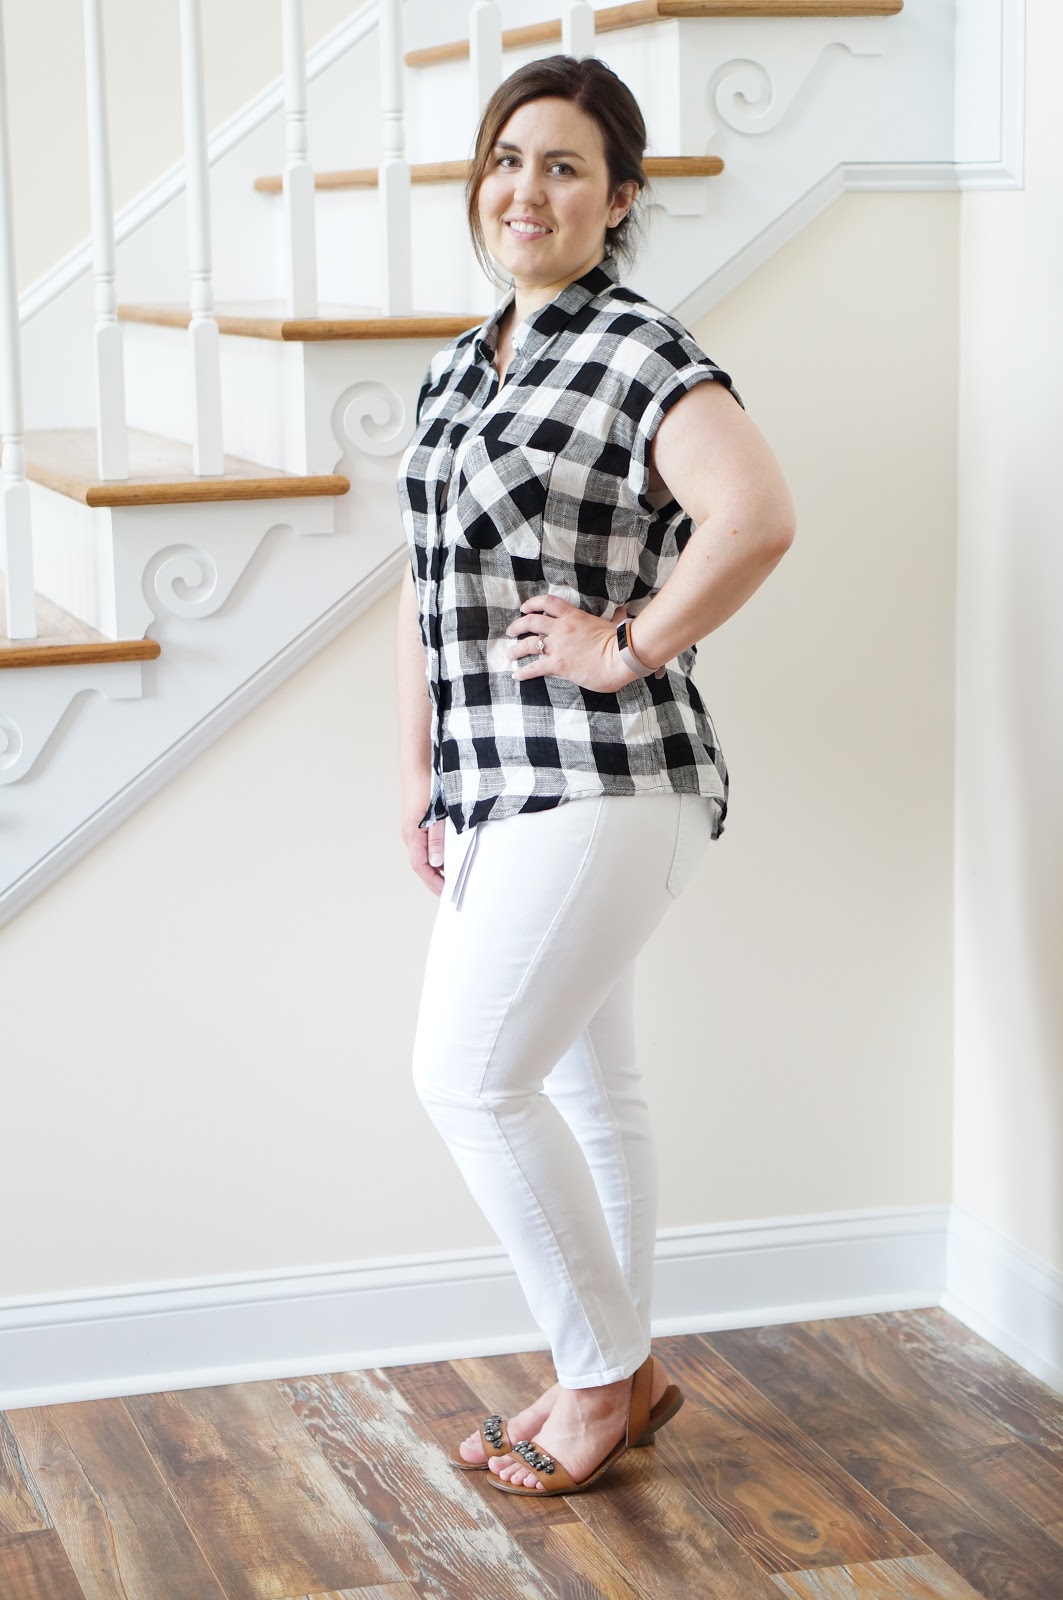 Popular North Caroilna style blogger Rebecca Lately shares her Stitch Fix outfits for May!  Check out what she got and what she kept!